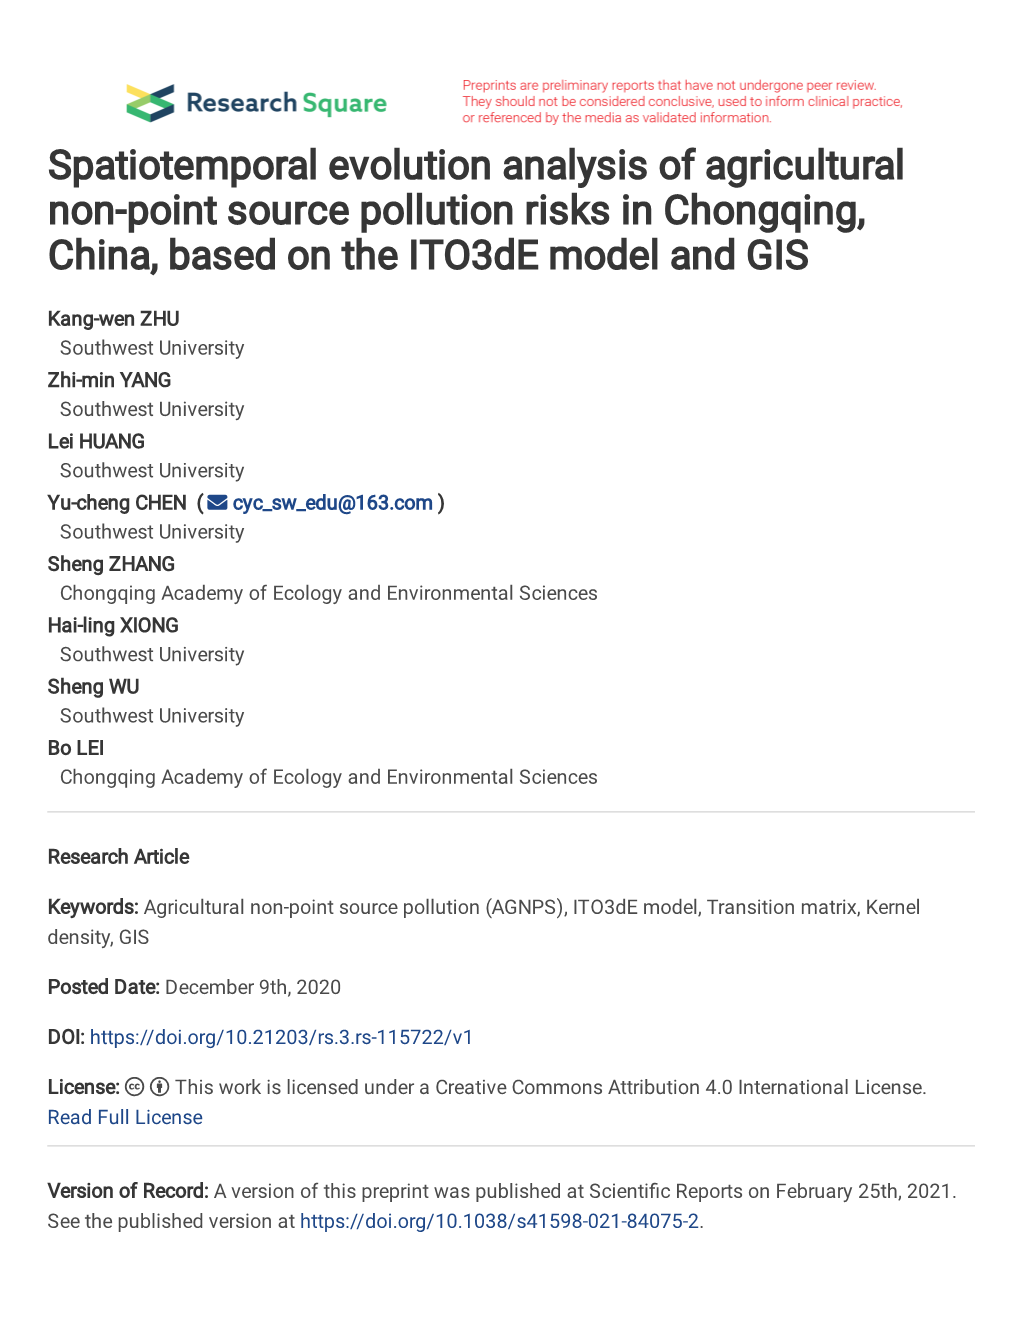 Spatiotemporal Evolution Analysis of Agricultural Non-Point Source Pollution Risks in Chongqing, China, Based on the Ito3de Model and GIS